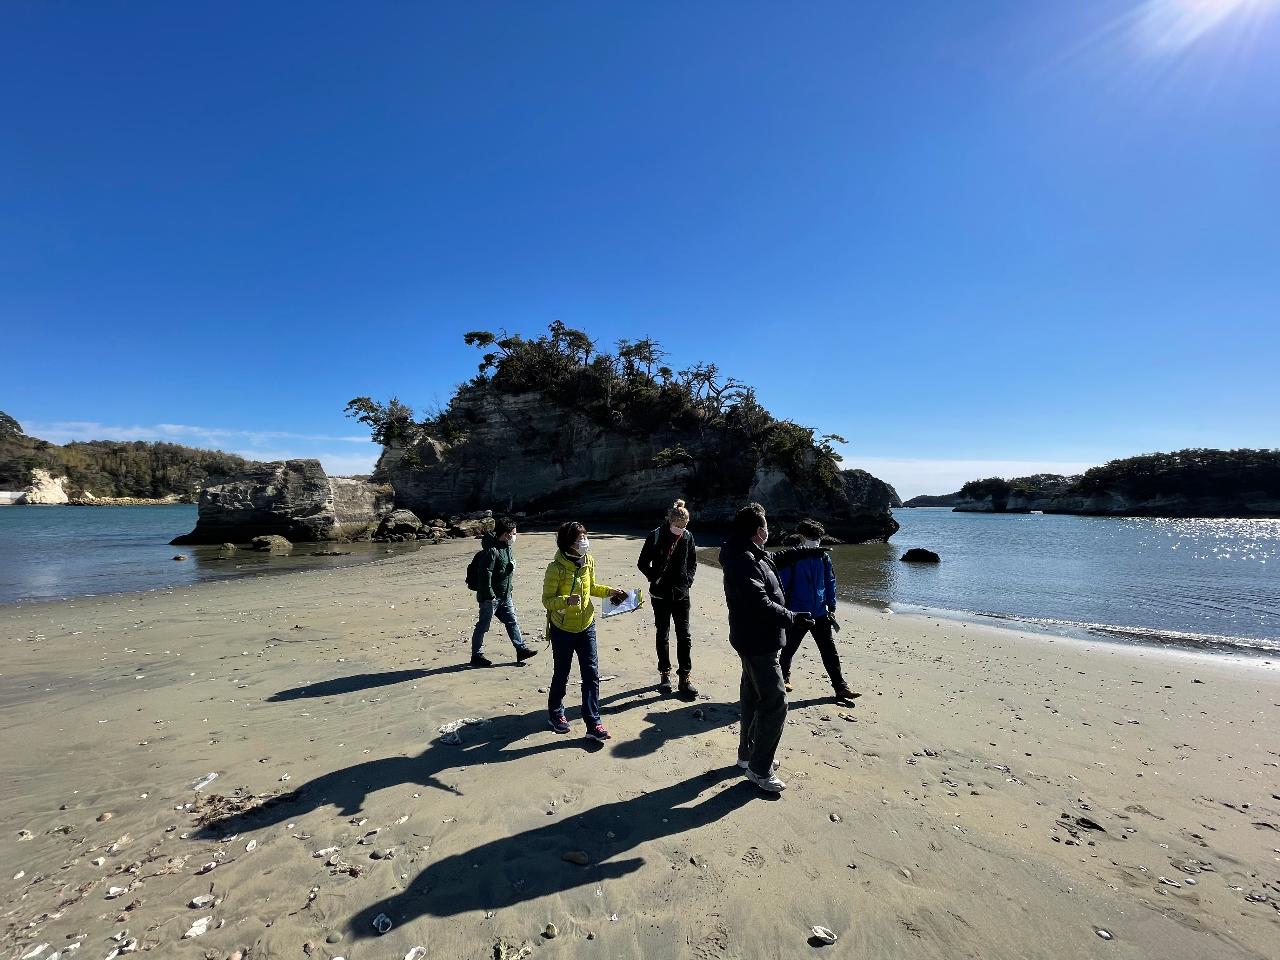 Explore Remote Islands in Matsushima Bay with a Local Guide and Chartered Boat